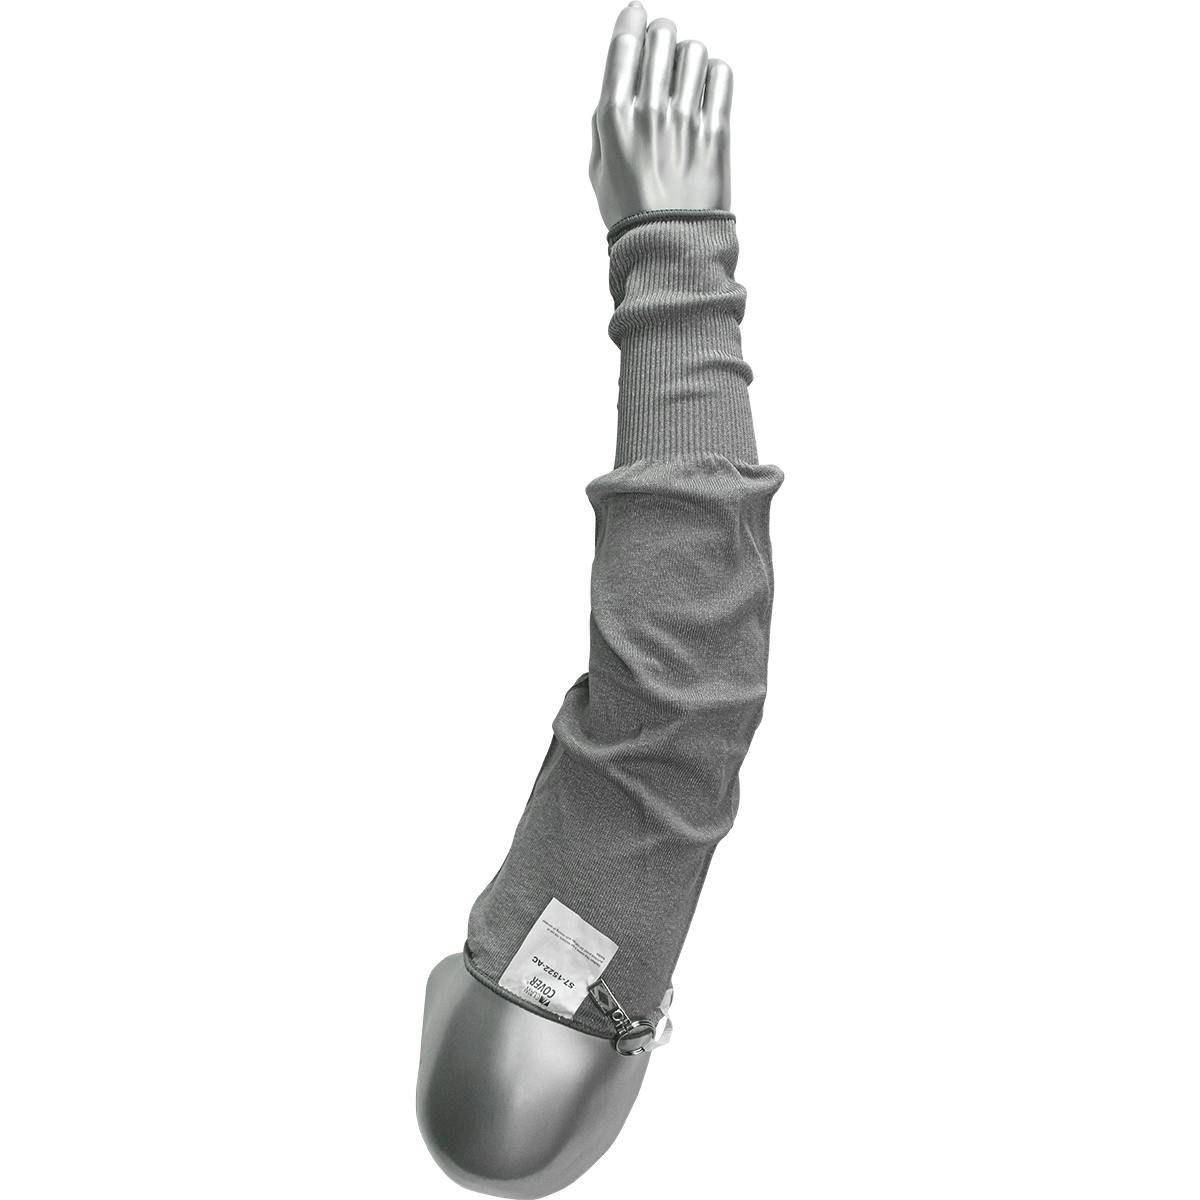 Single-Ply HPPE / Steel Blended Sleeve with Antimicrobial Fibers, Light Gray (S7-15-AC) - 22